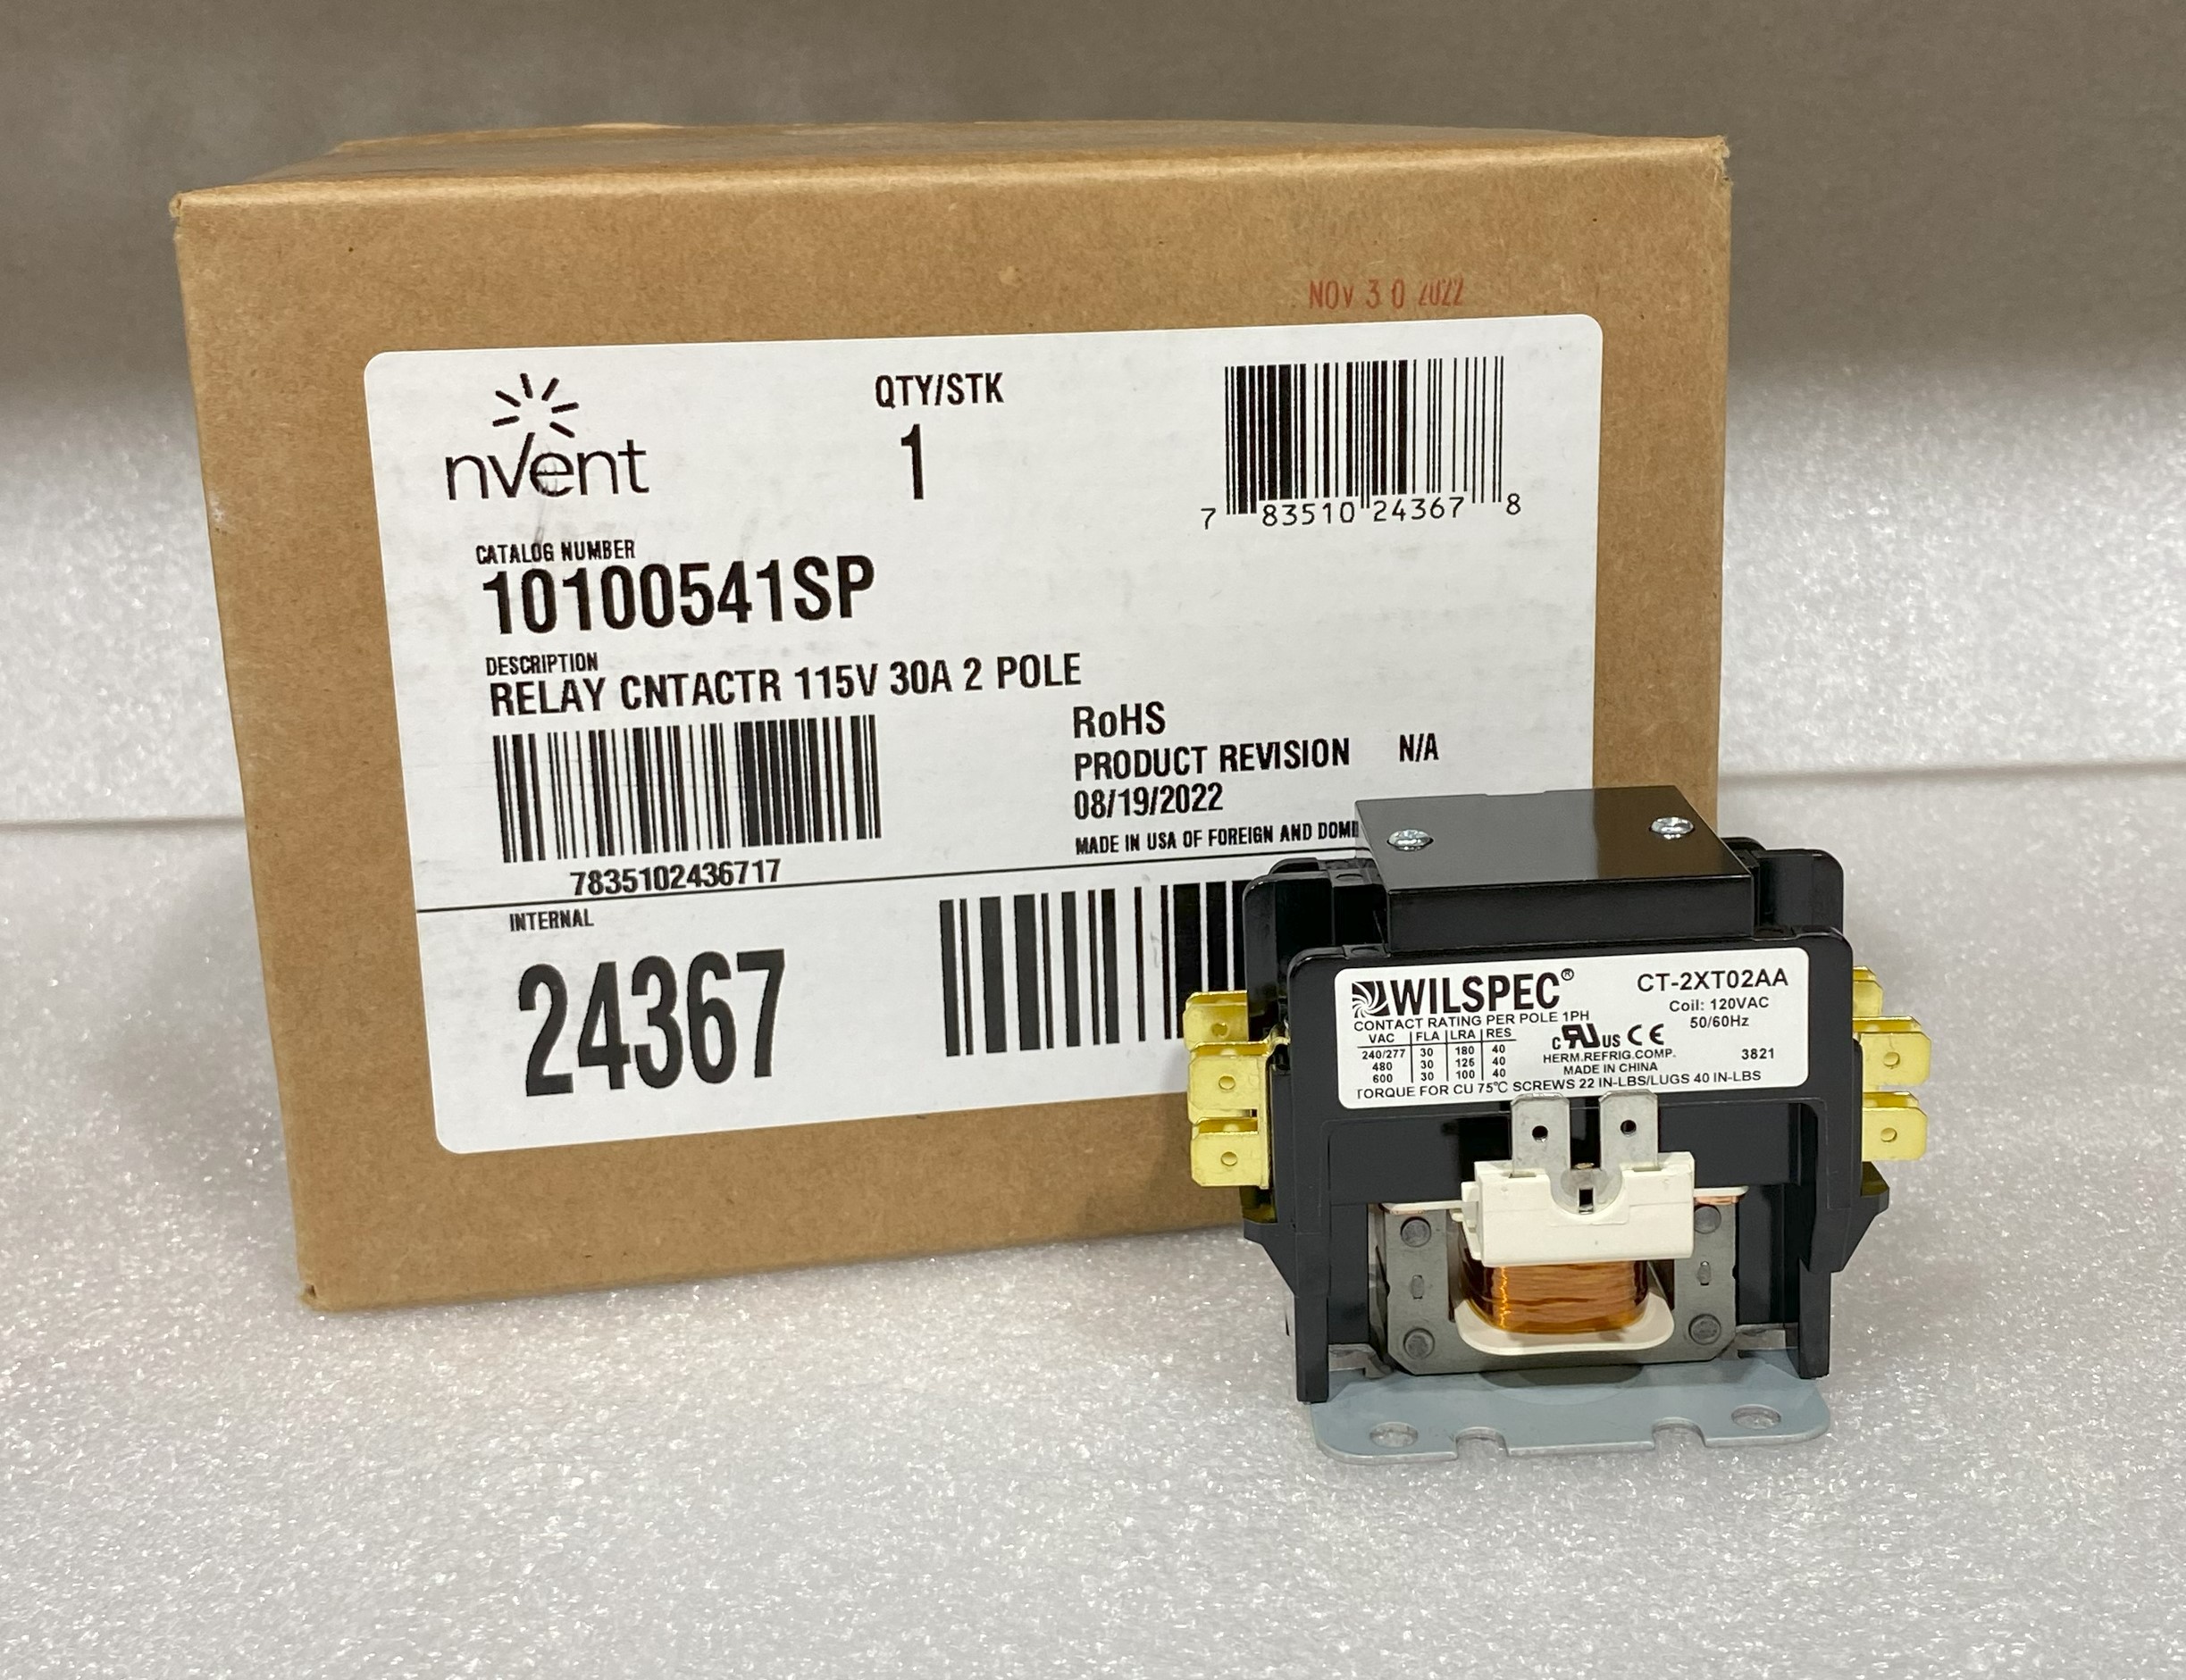 nVent 10100541SP Relay Contactor